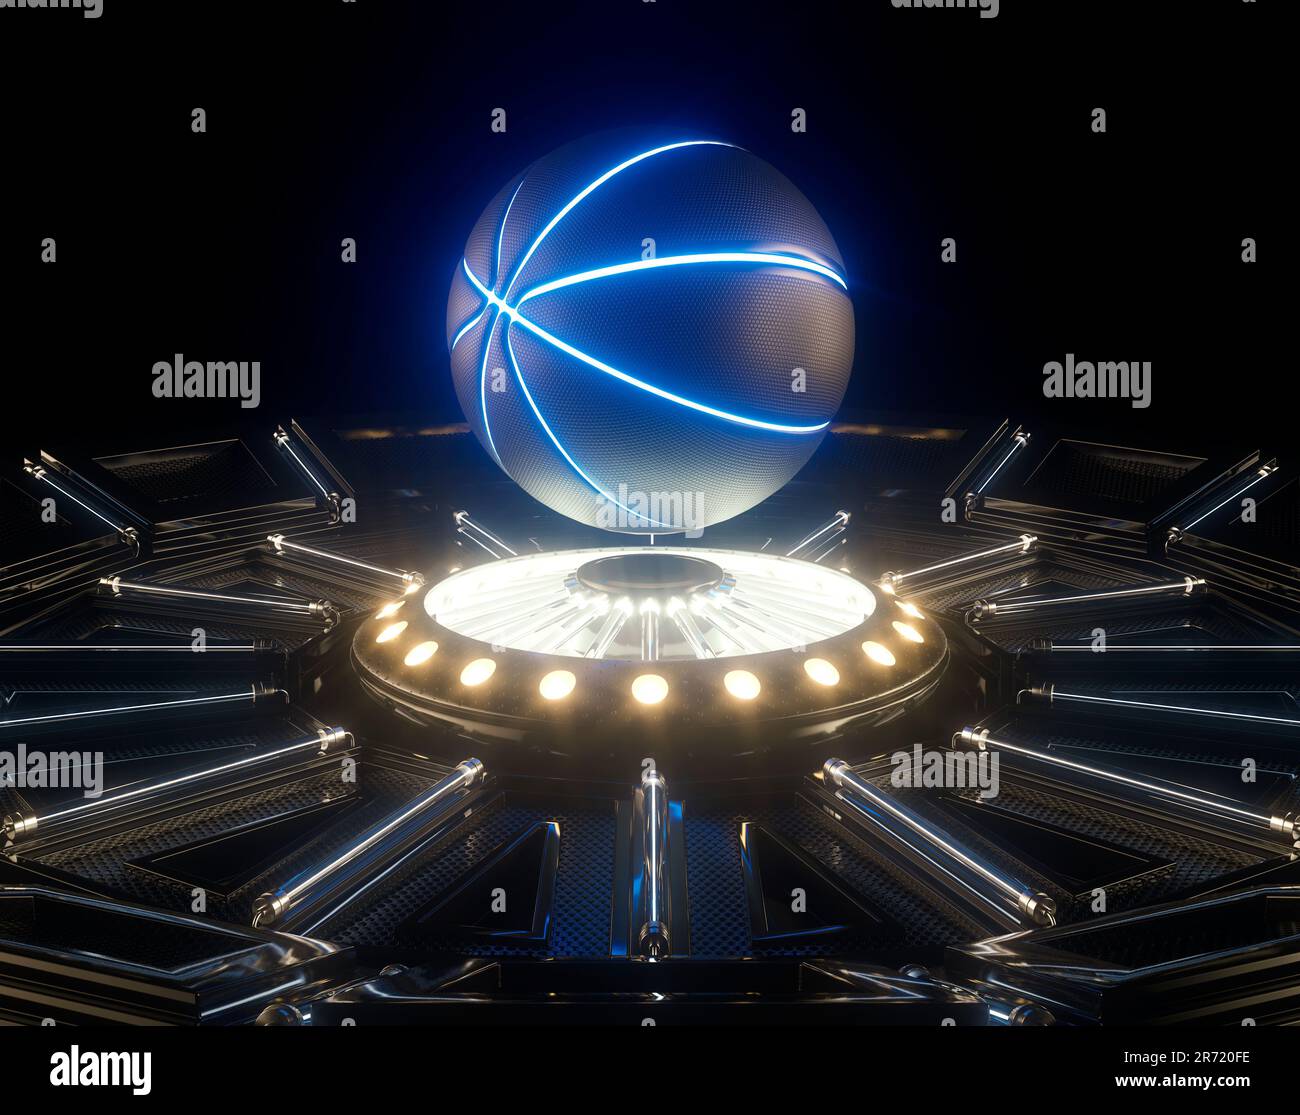 Black And Gold Basketball Concept by Allan Swart